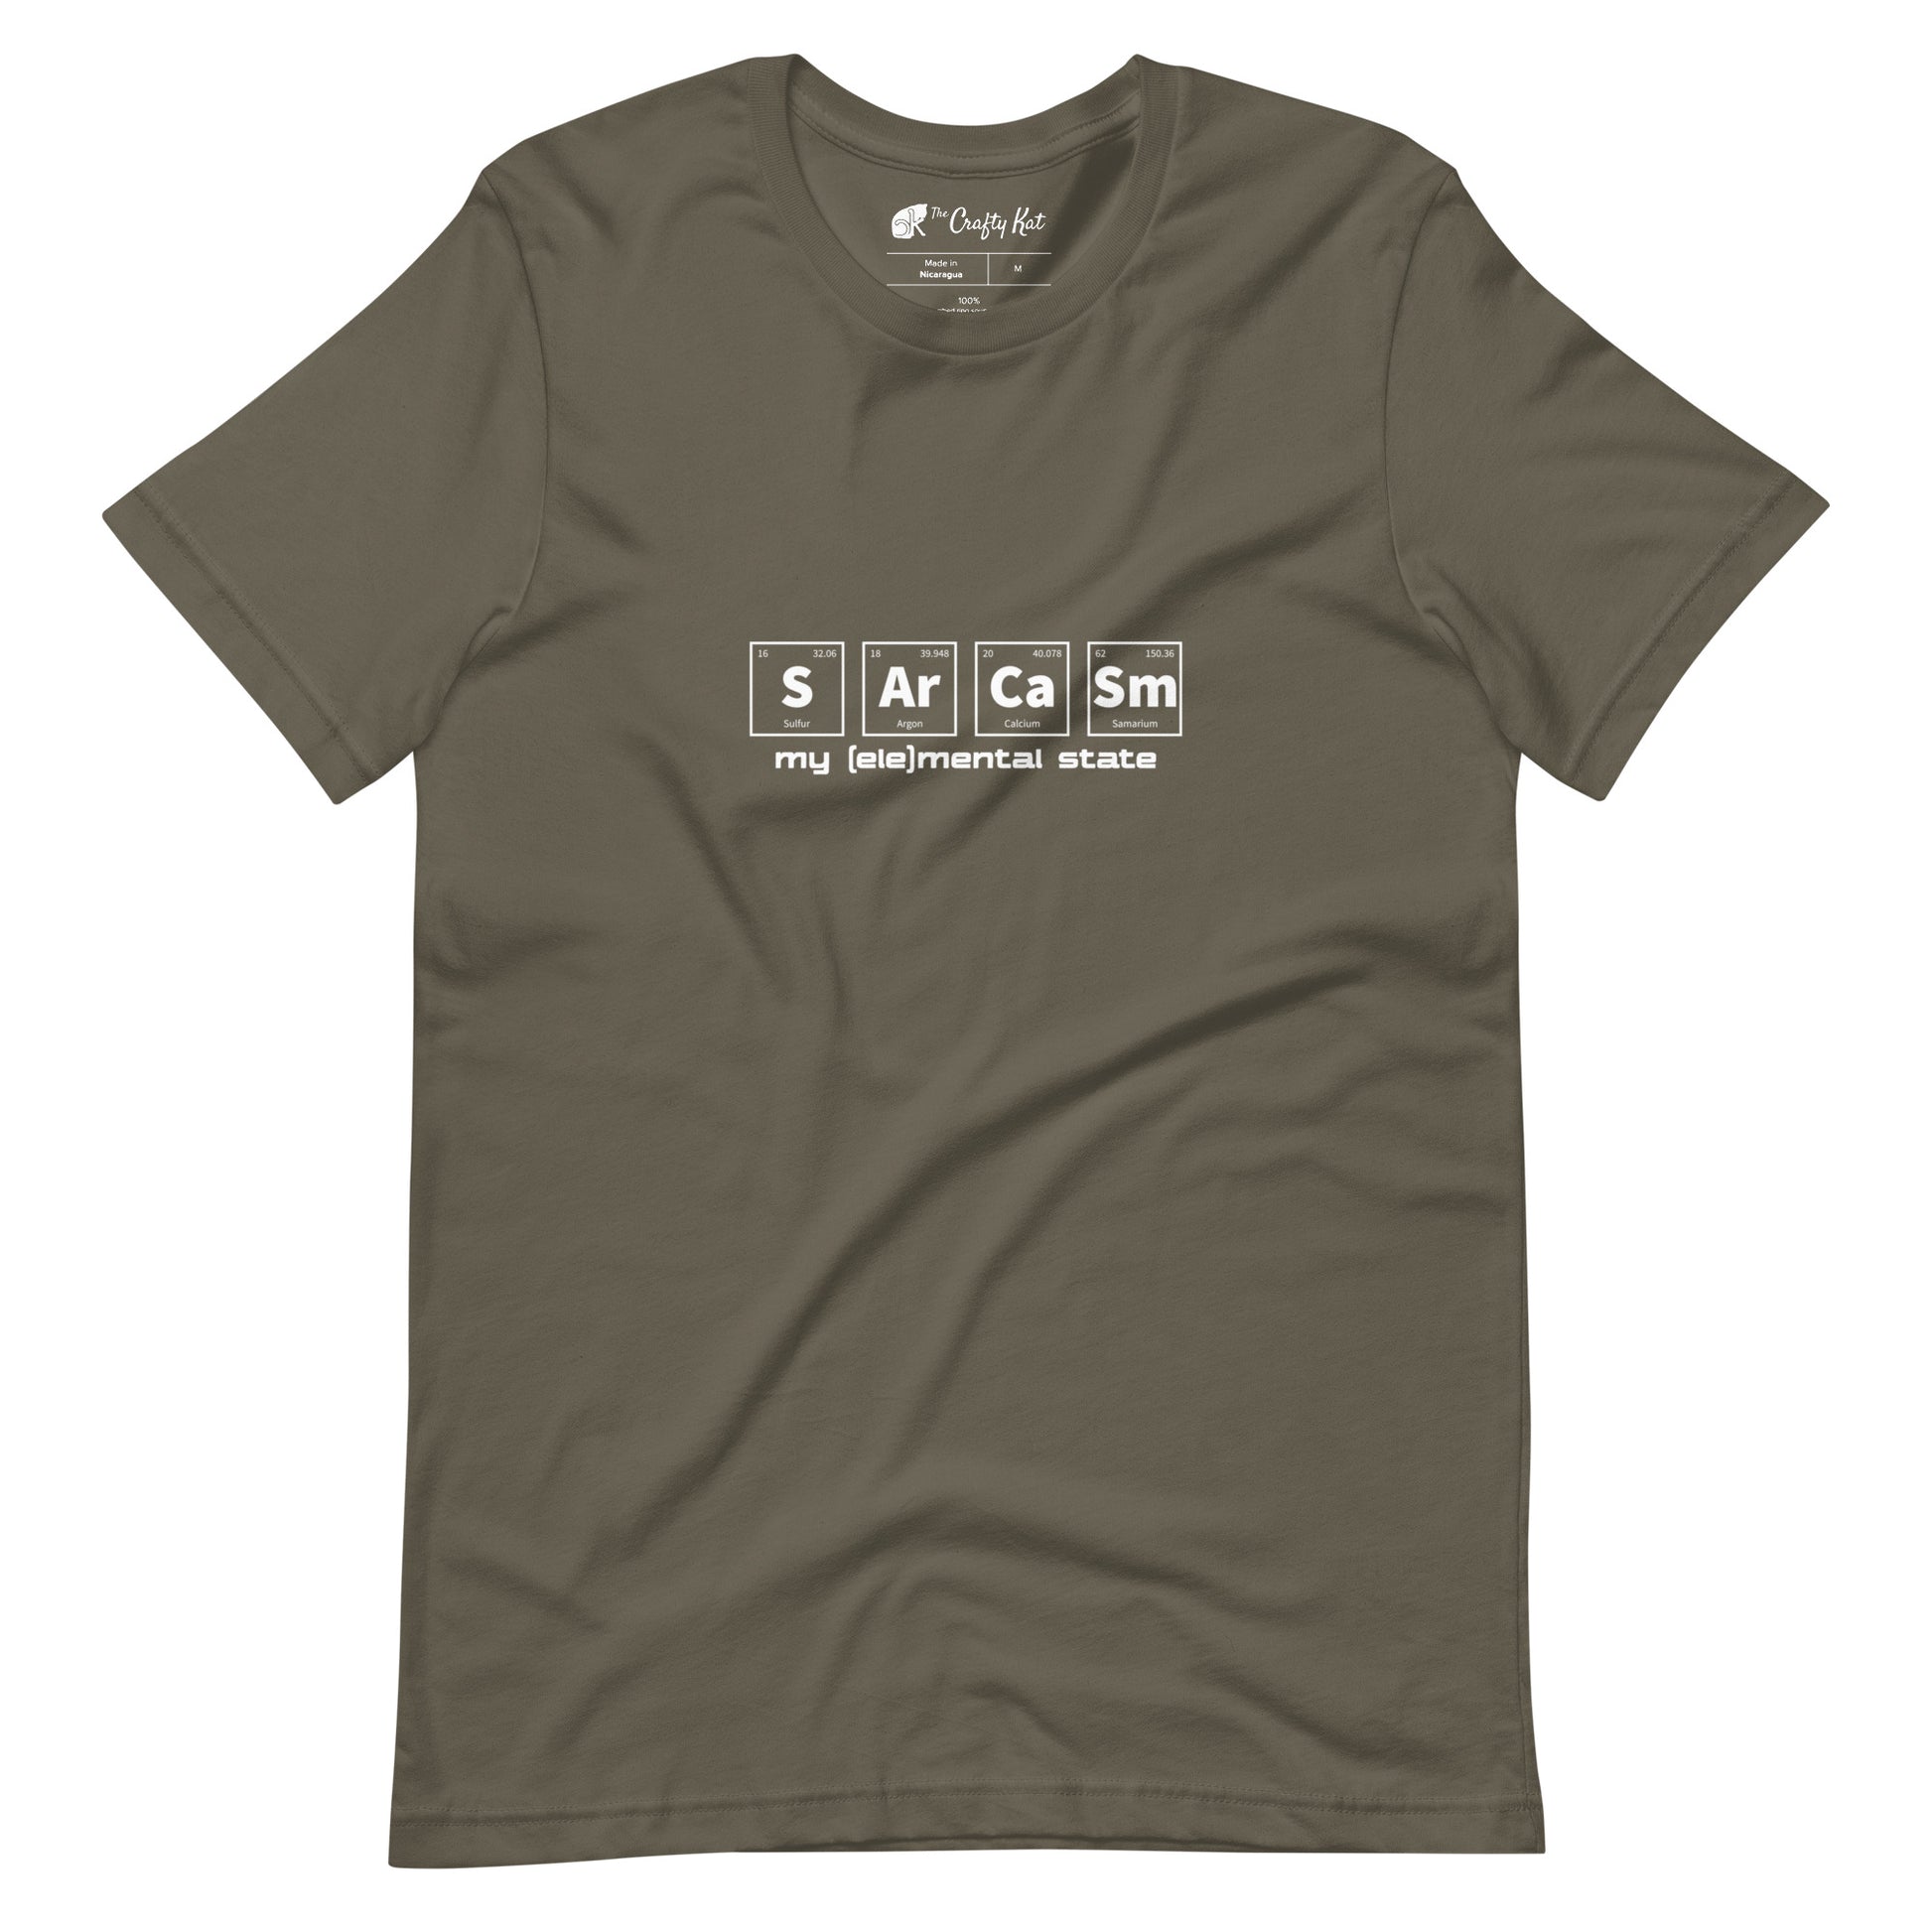 Army (olive tan) t-shirt with graphic of periodic table of elements symbols for Sulfur (S), Argon (Ar), Calcium (Ca), and Samarium (Sm) and text "my (ele)mental state"